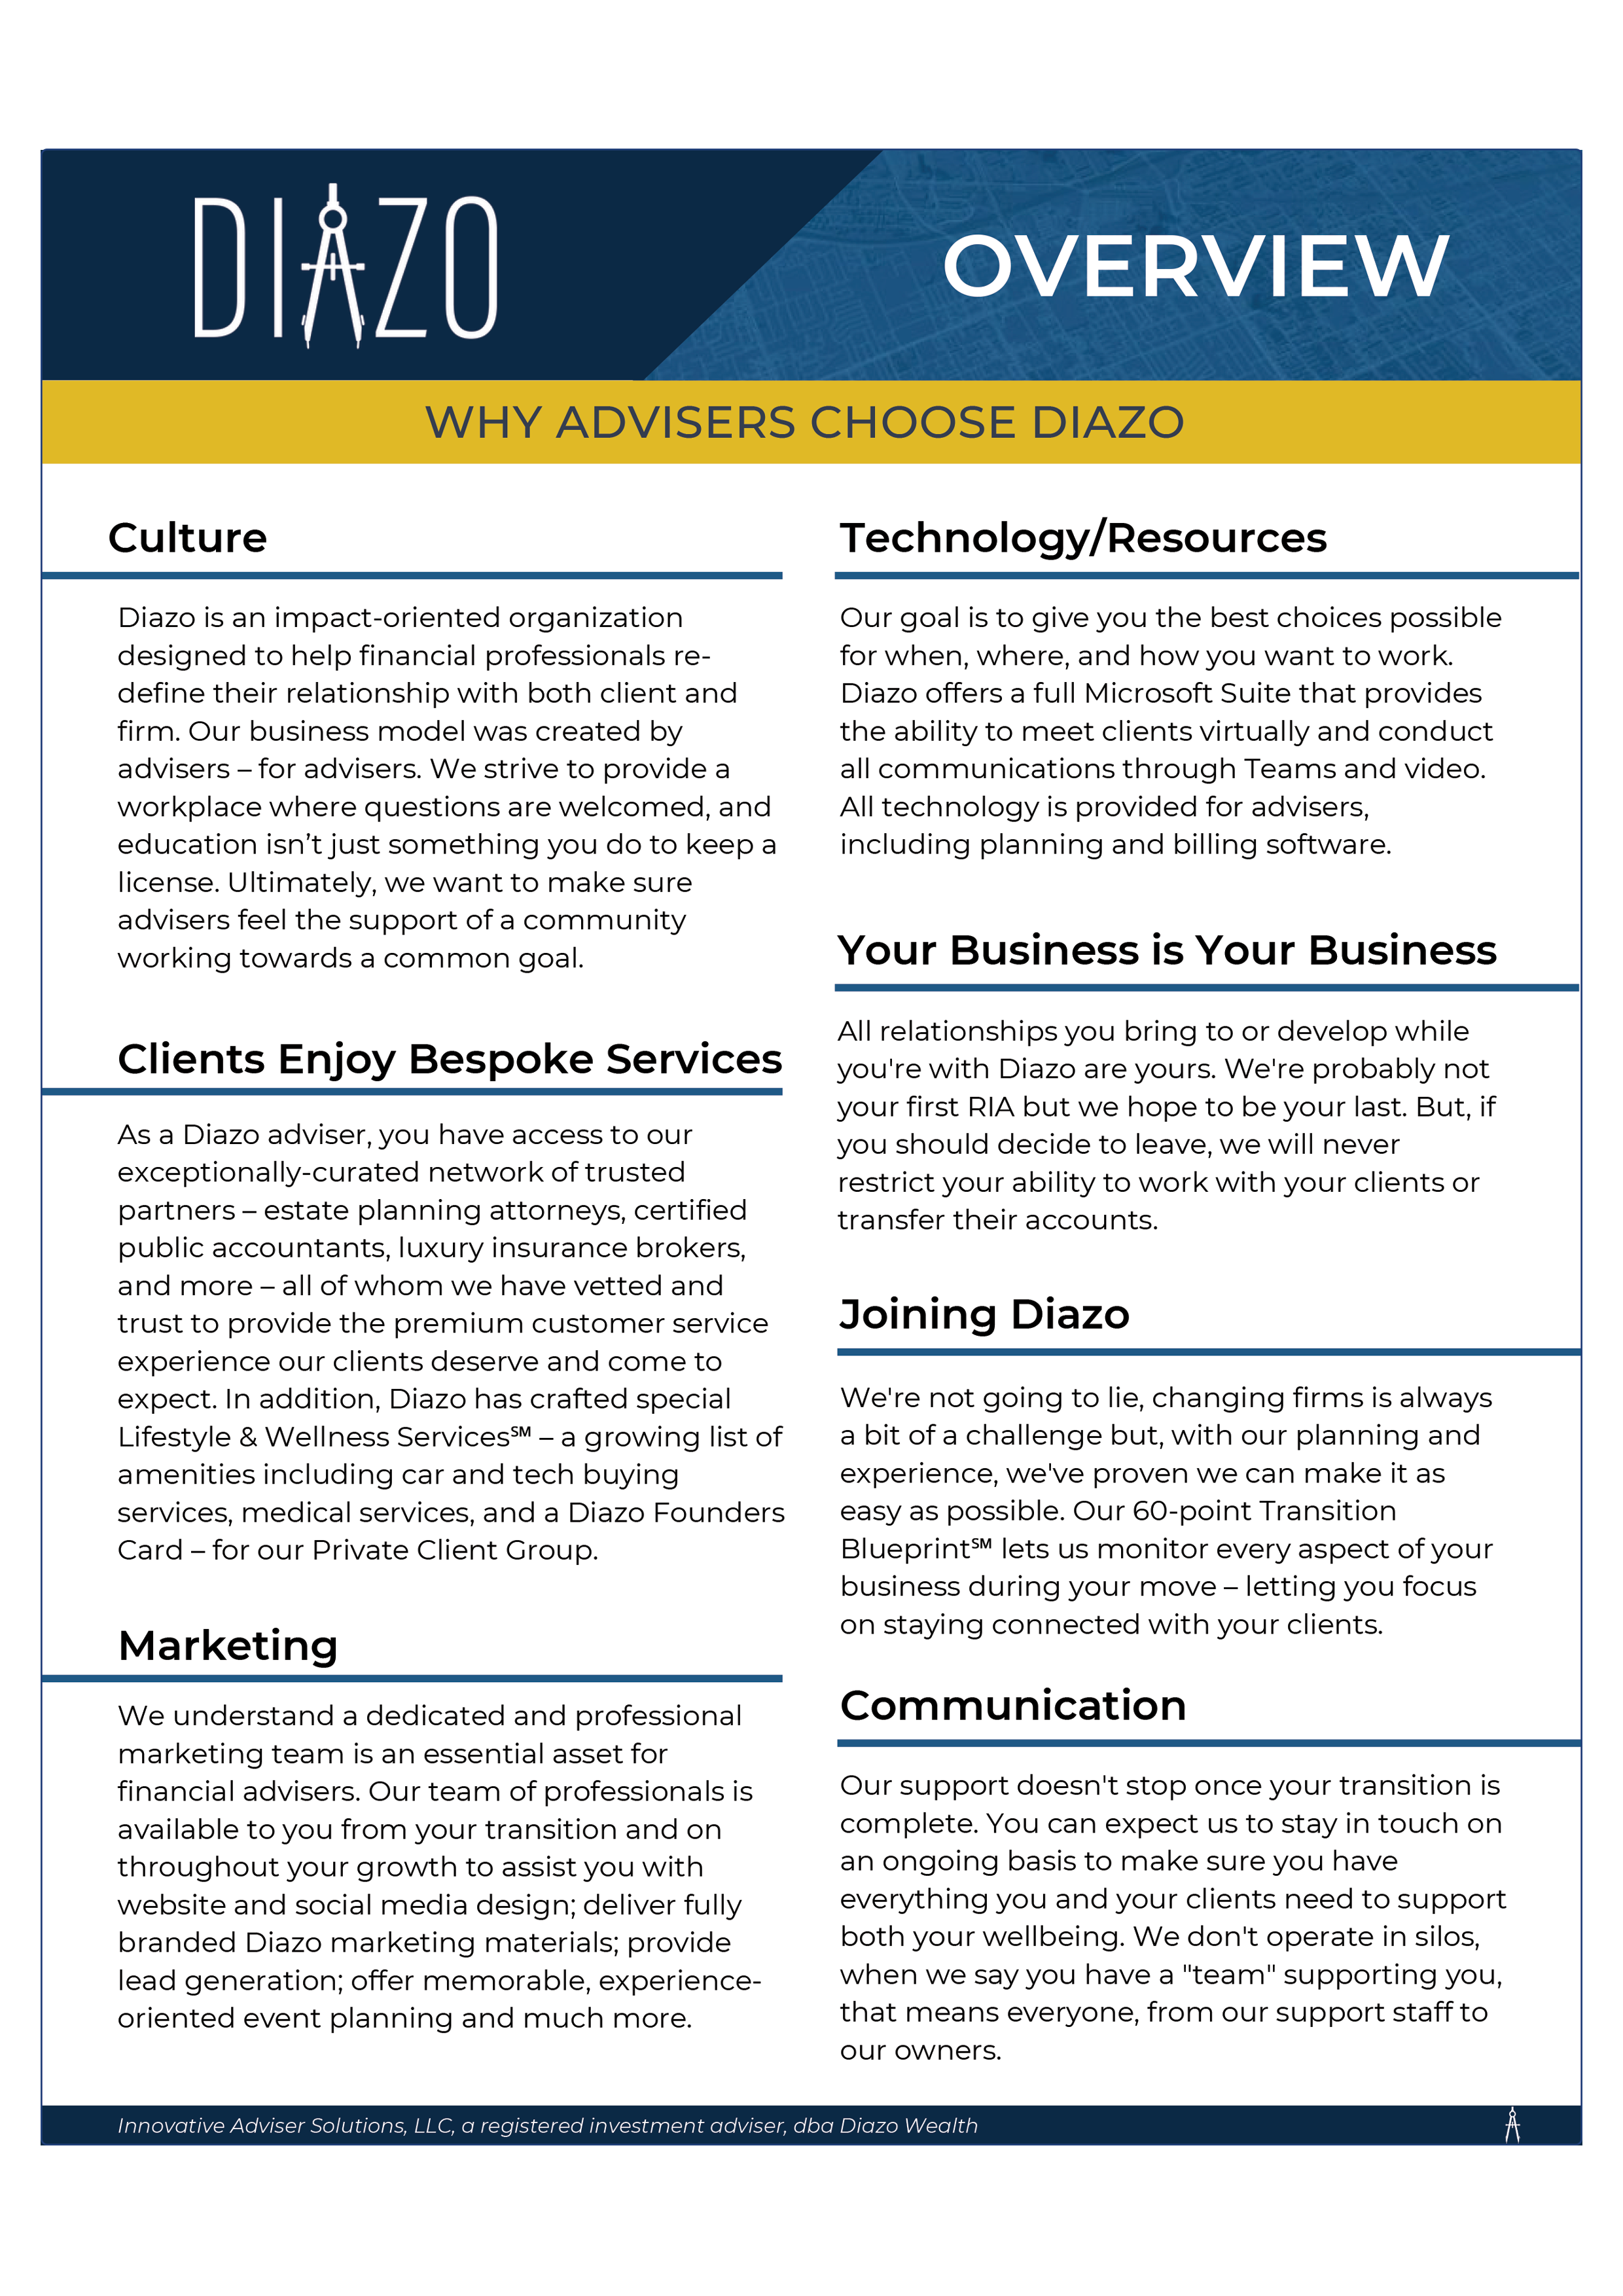 Why-Advisers-Choose-Diazo-One-Pager